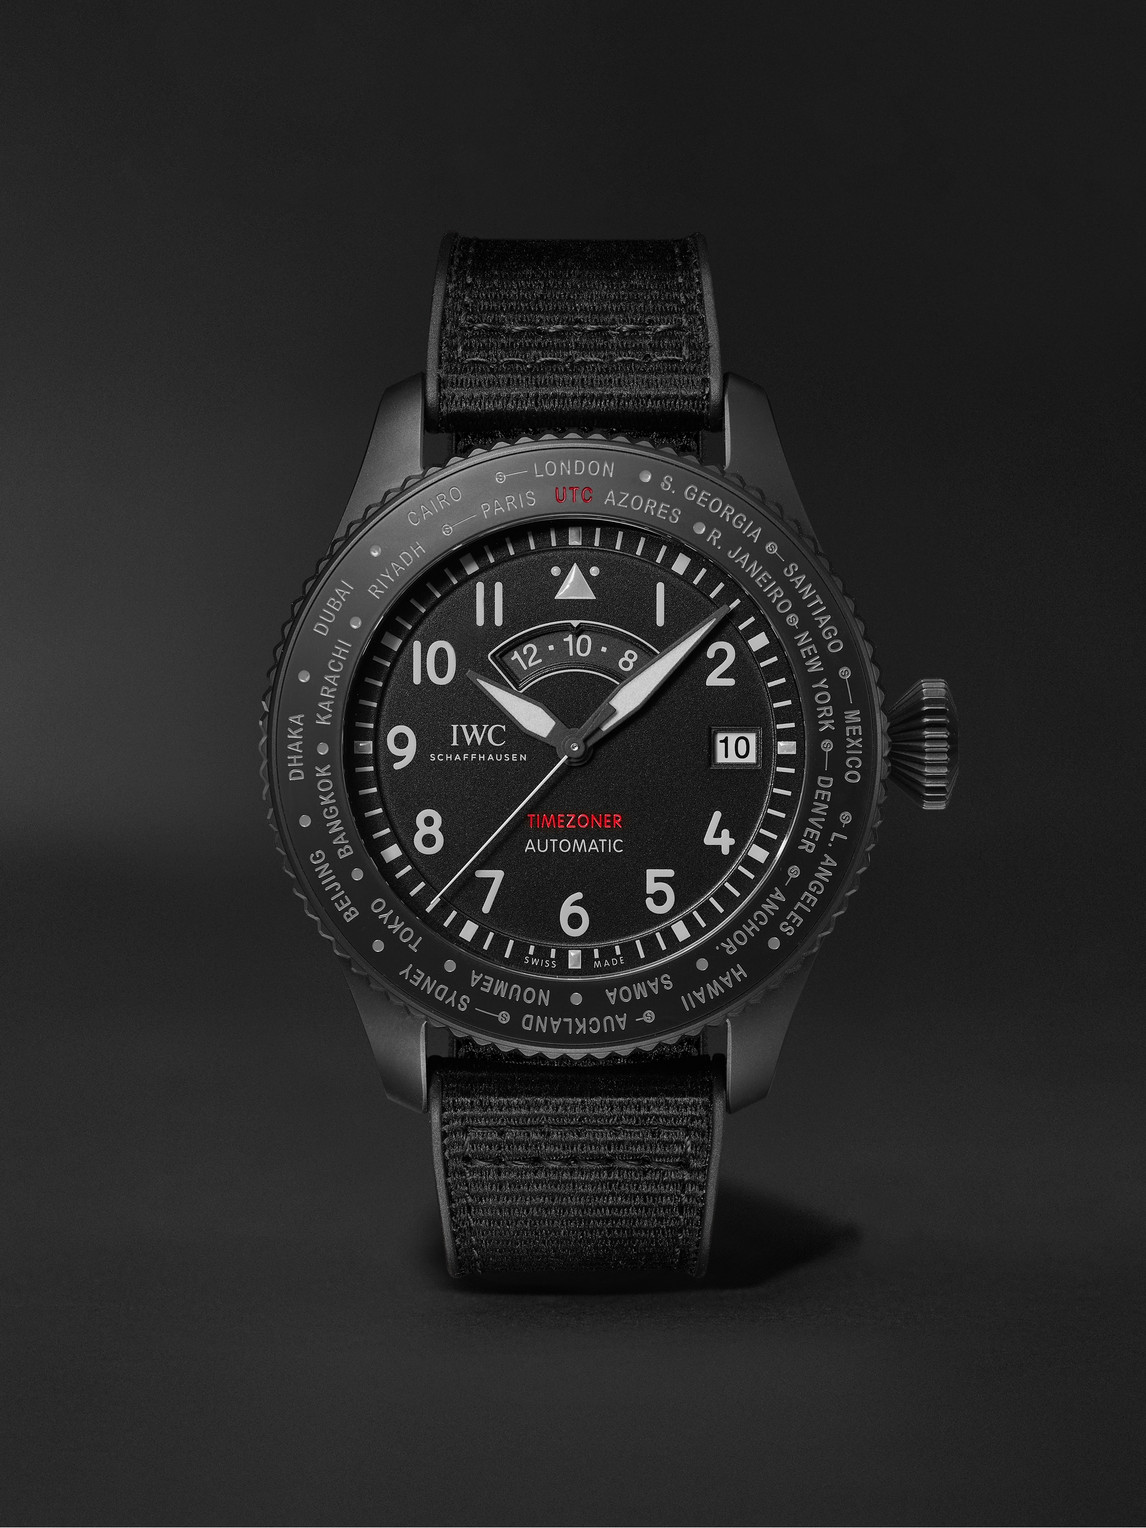 Pilot's Watch Timezoner TOP GUN Limited Edition Automatic Ceratanium and Webbing Watch, Ref. No. IW395505